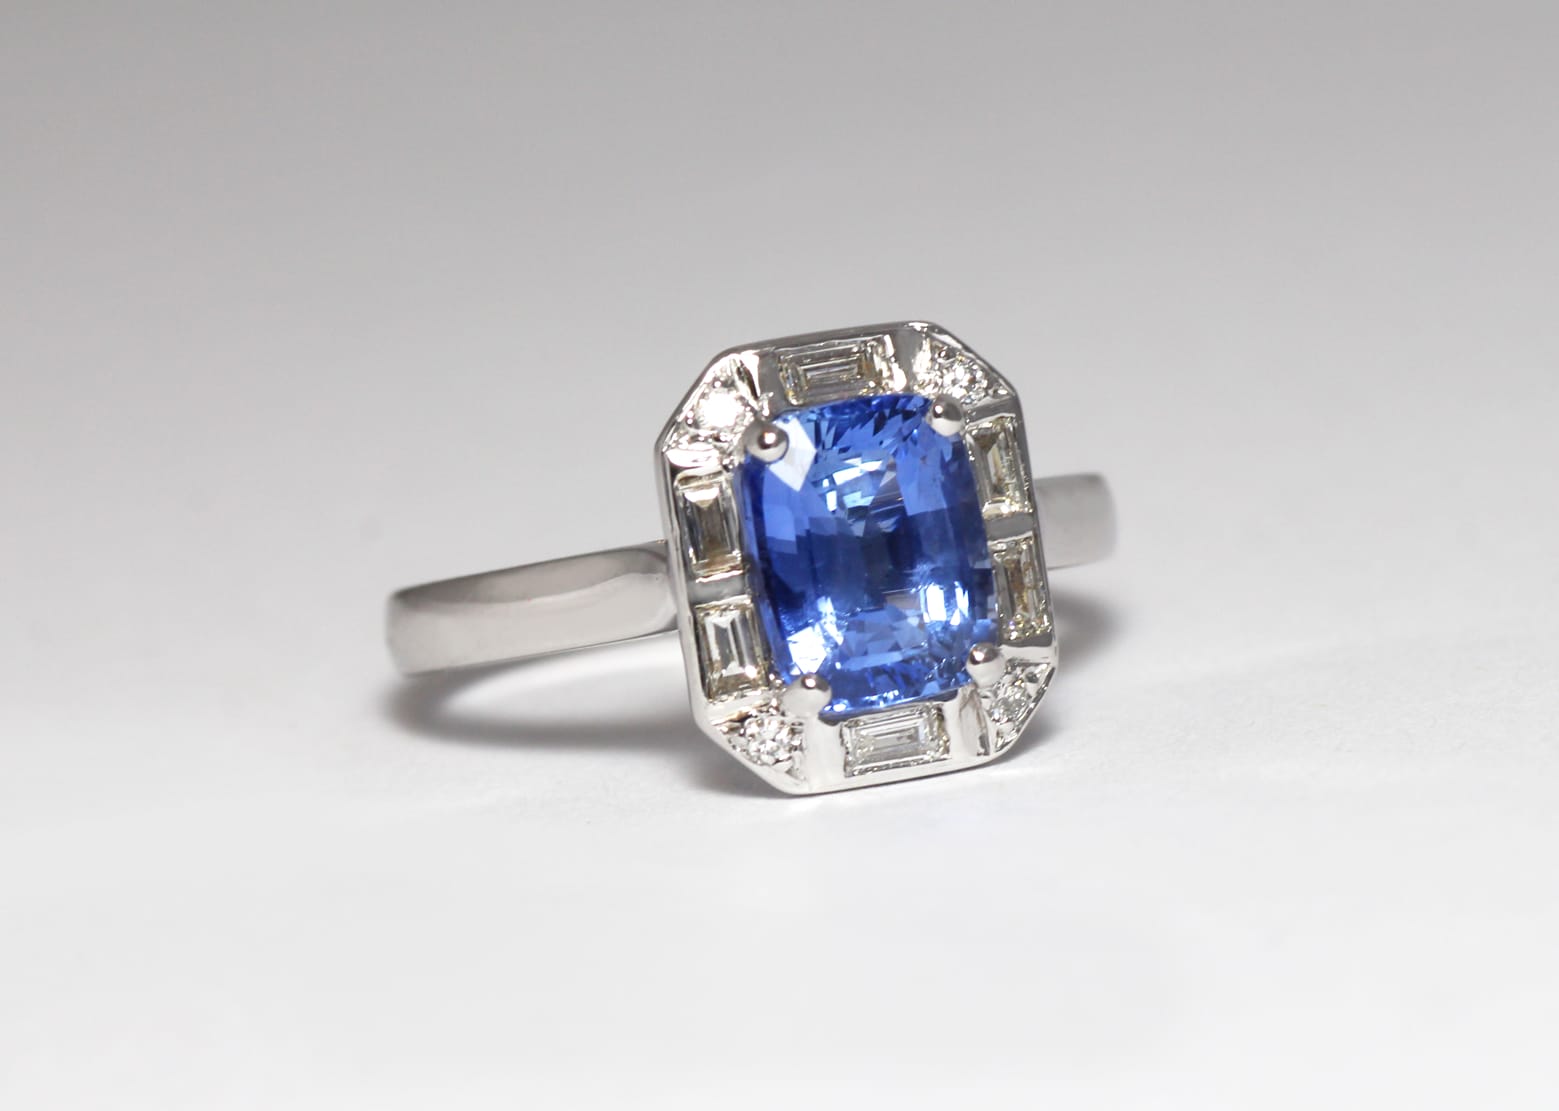 18ct Fairtrade white gold with sapphire and diamonds by Zoe Pook Jewellery